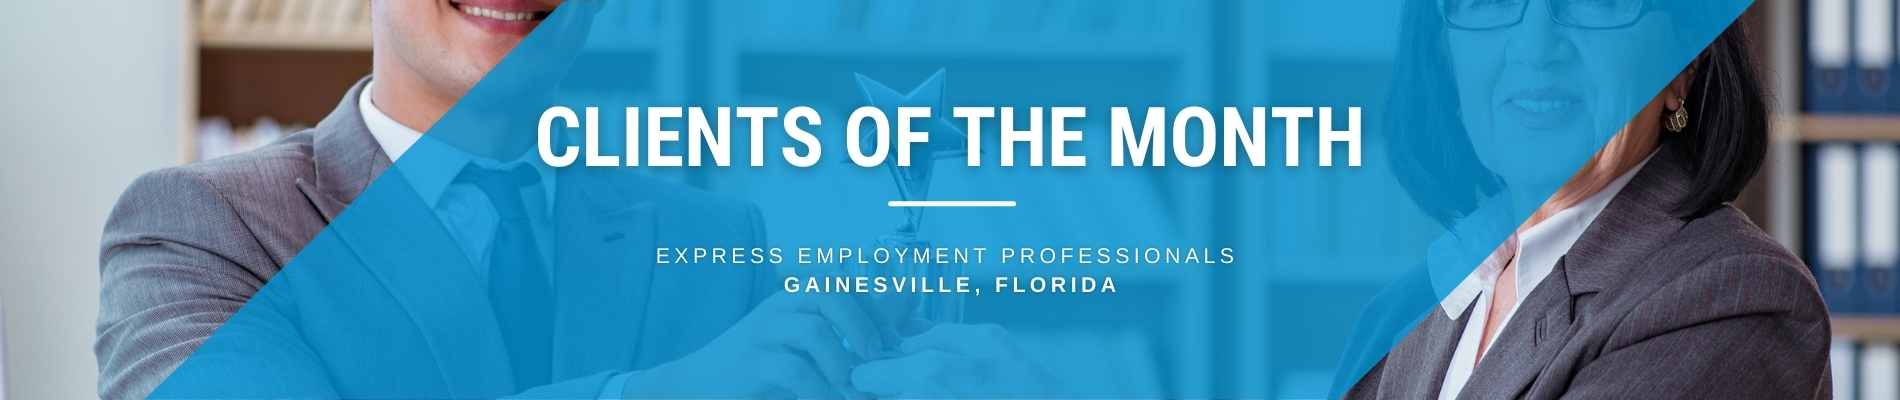 Staffing Agency in Gainesville FL Clients of the Month